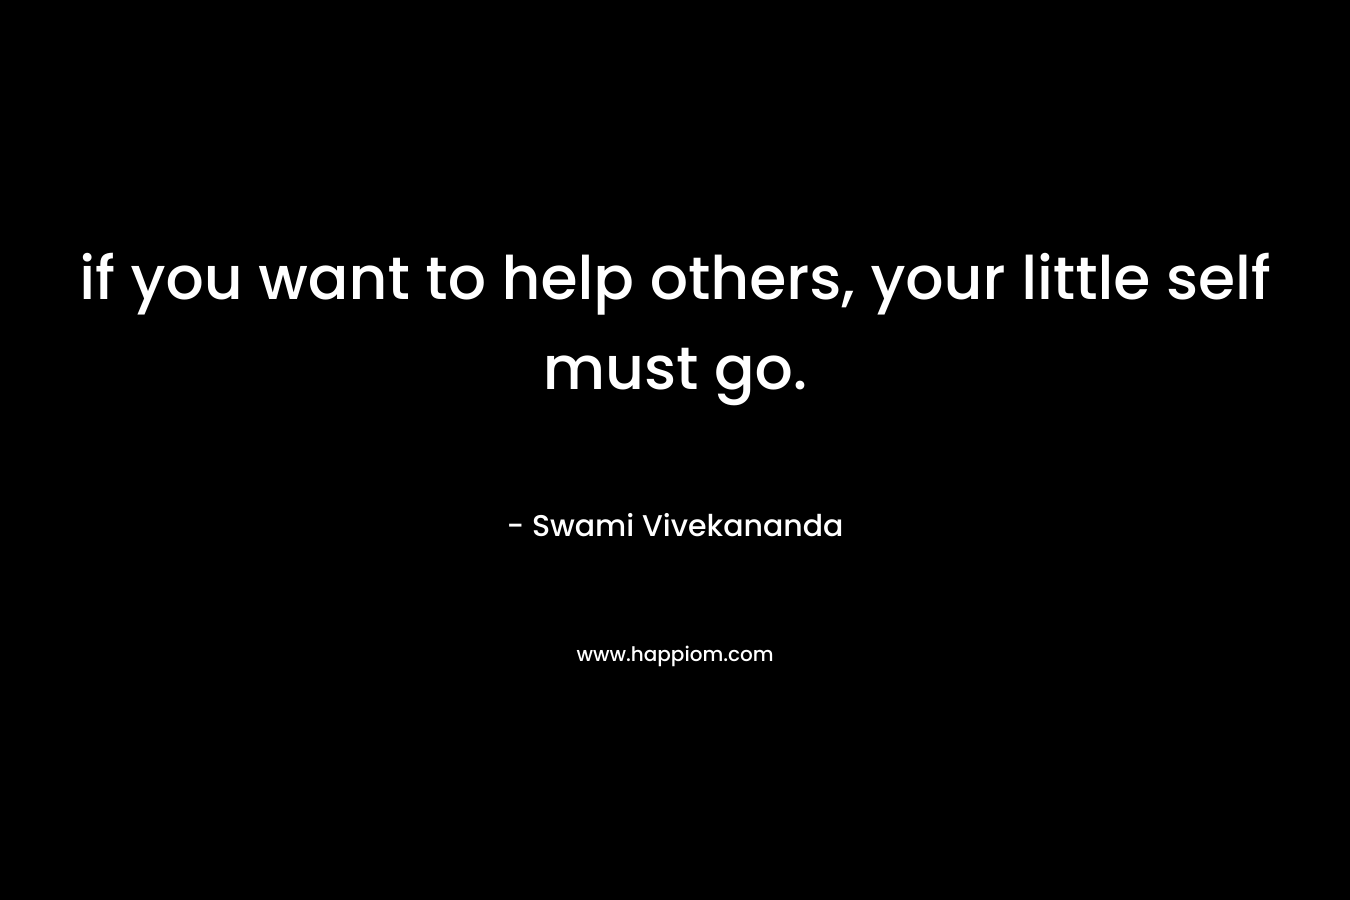 if you want to help others, your little self must go.